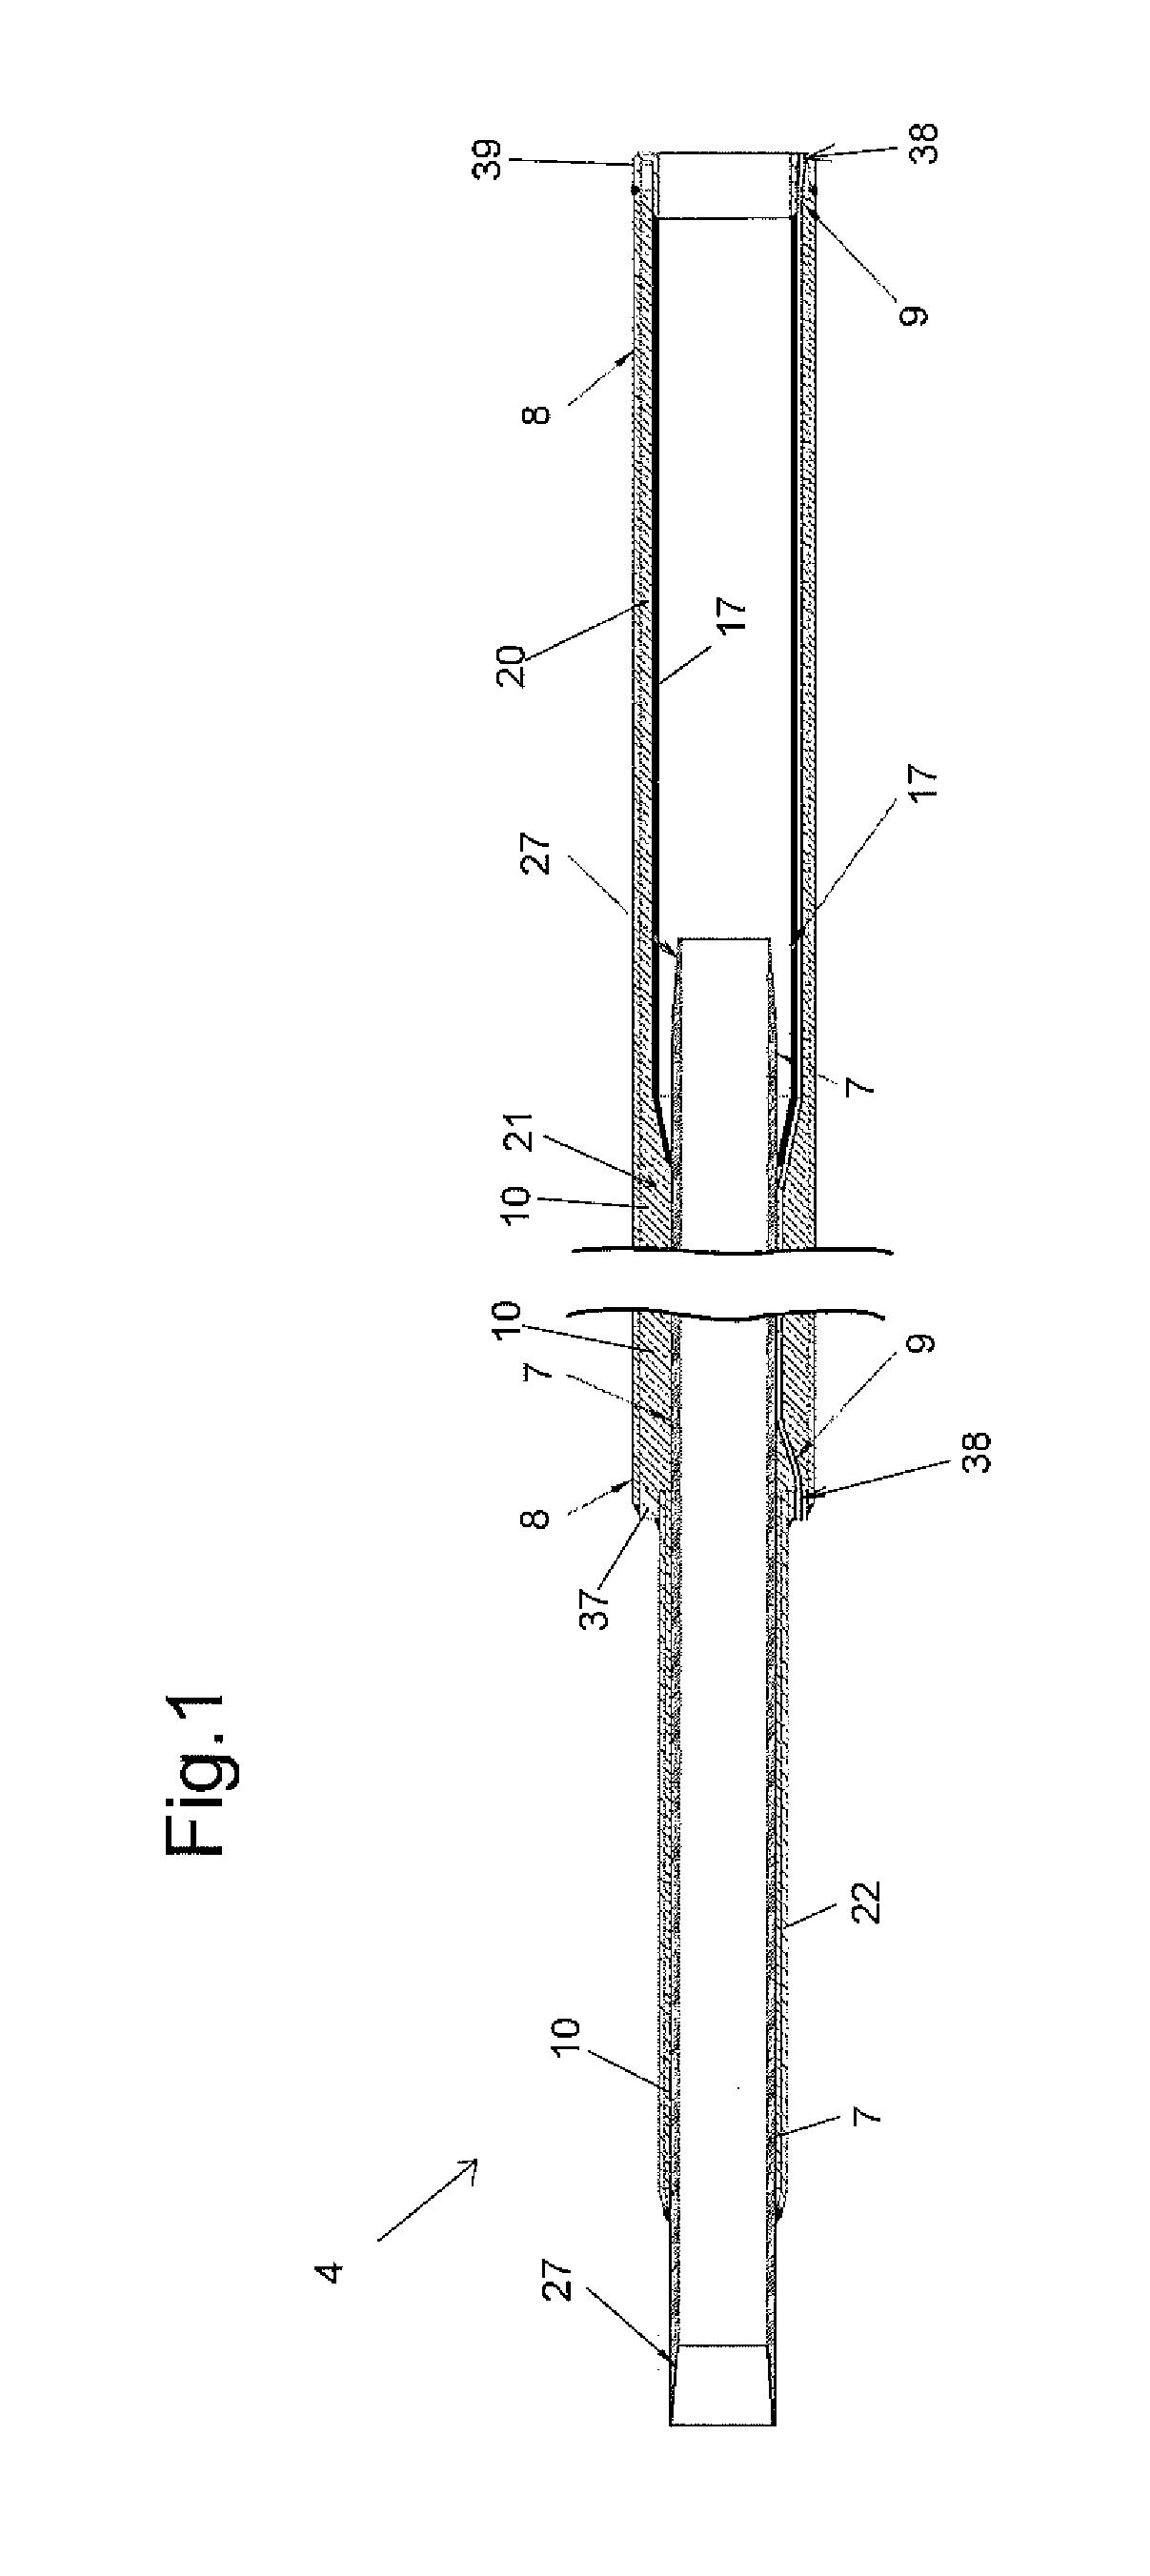 Thermally insulated and heated double-walled pipe segment for fitting by screw fastening, and a method of implementing such a pipe segment